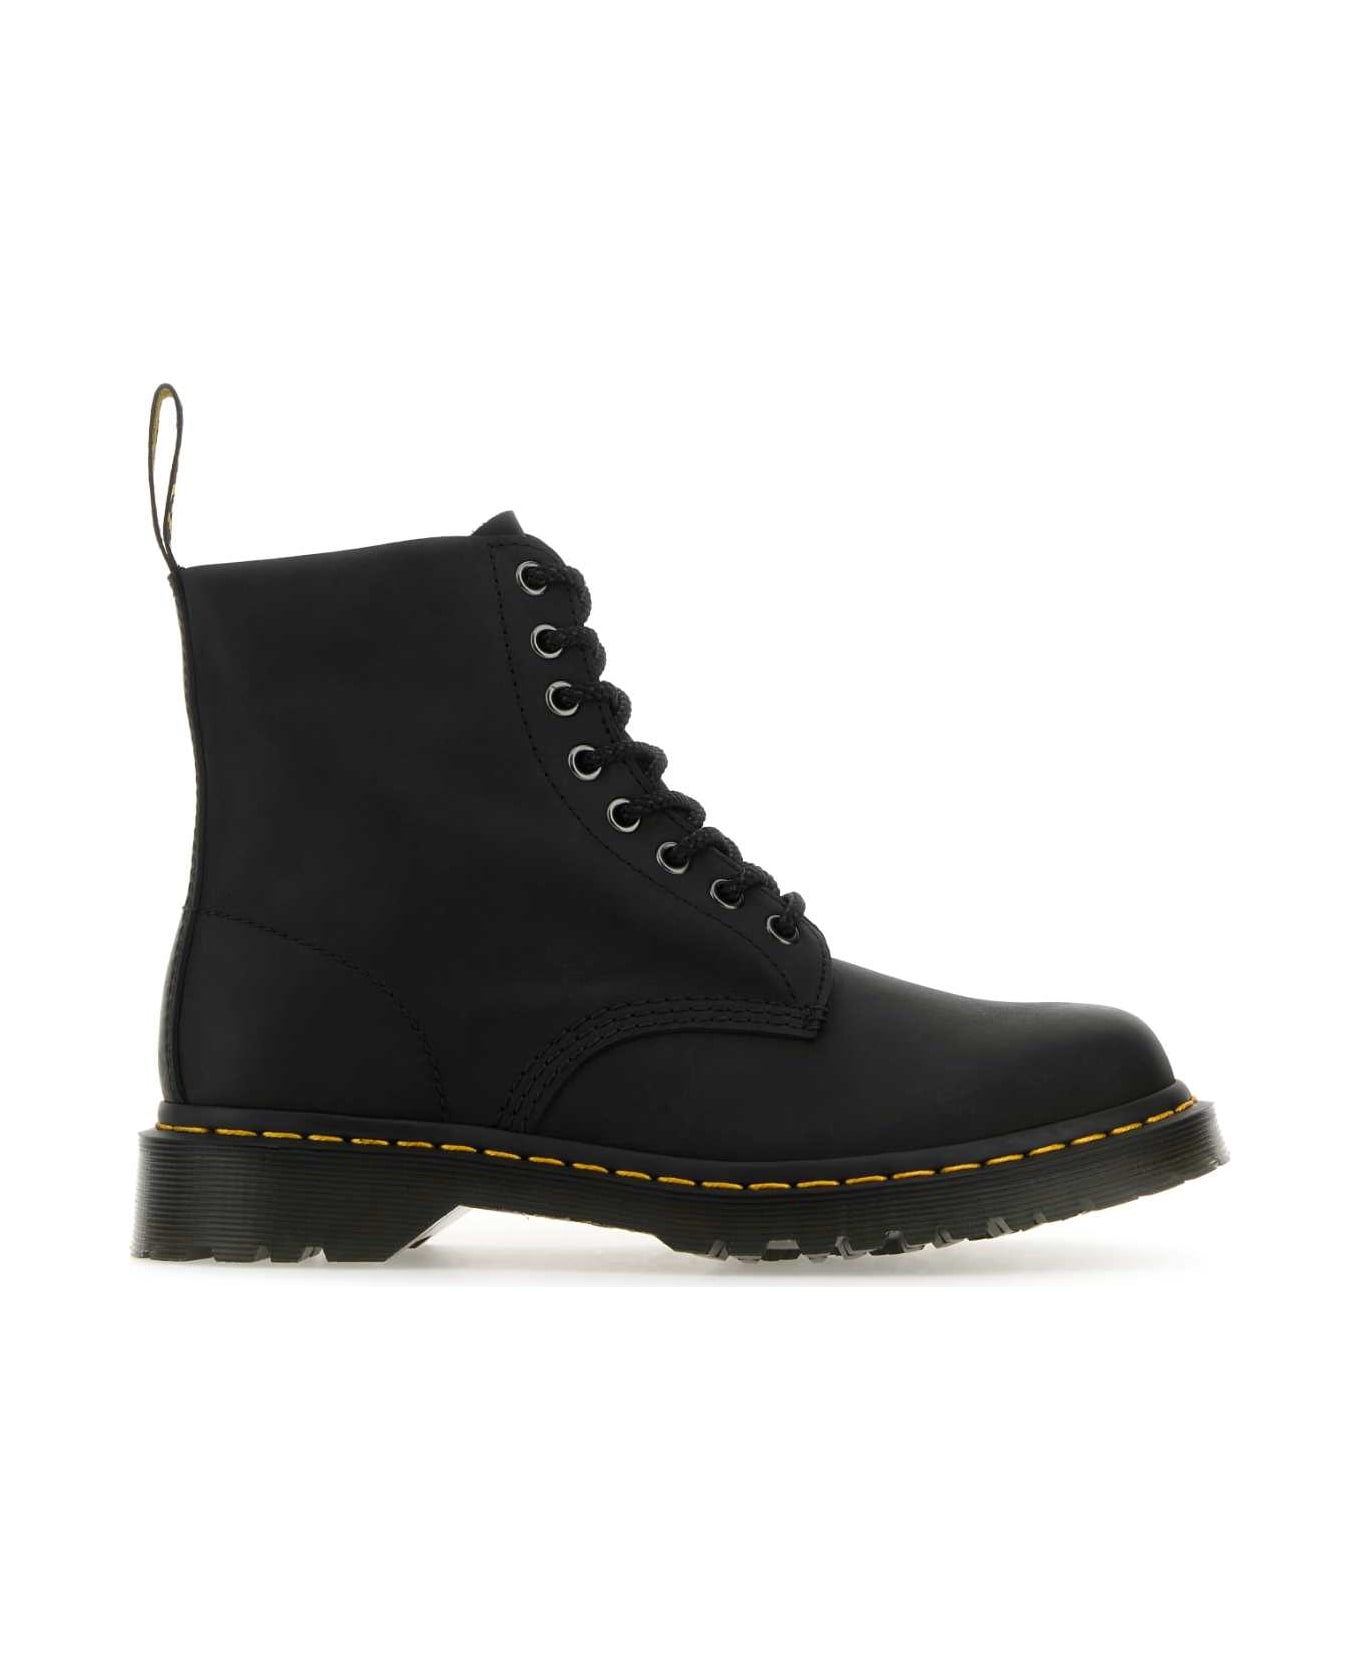 Black Leather 1460 Ankle Boots - 1